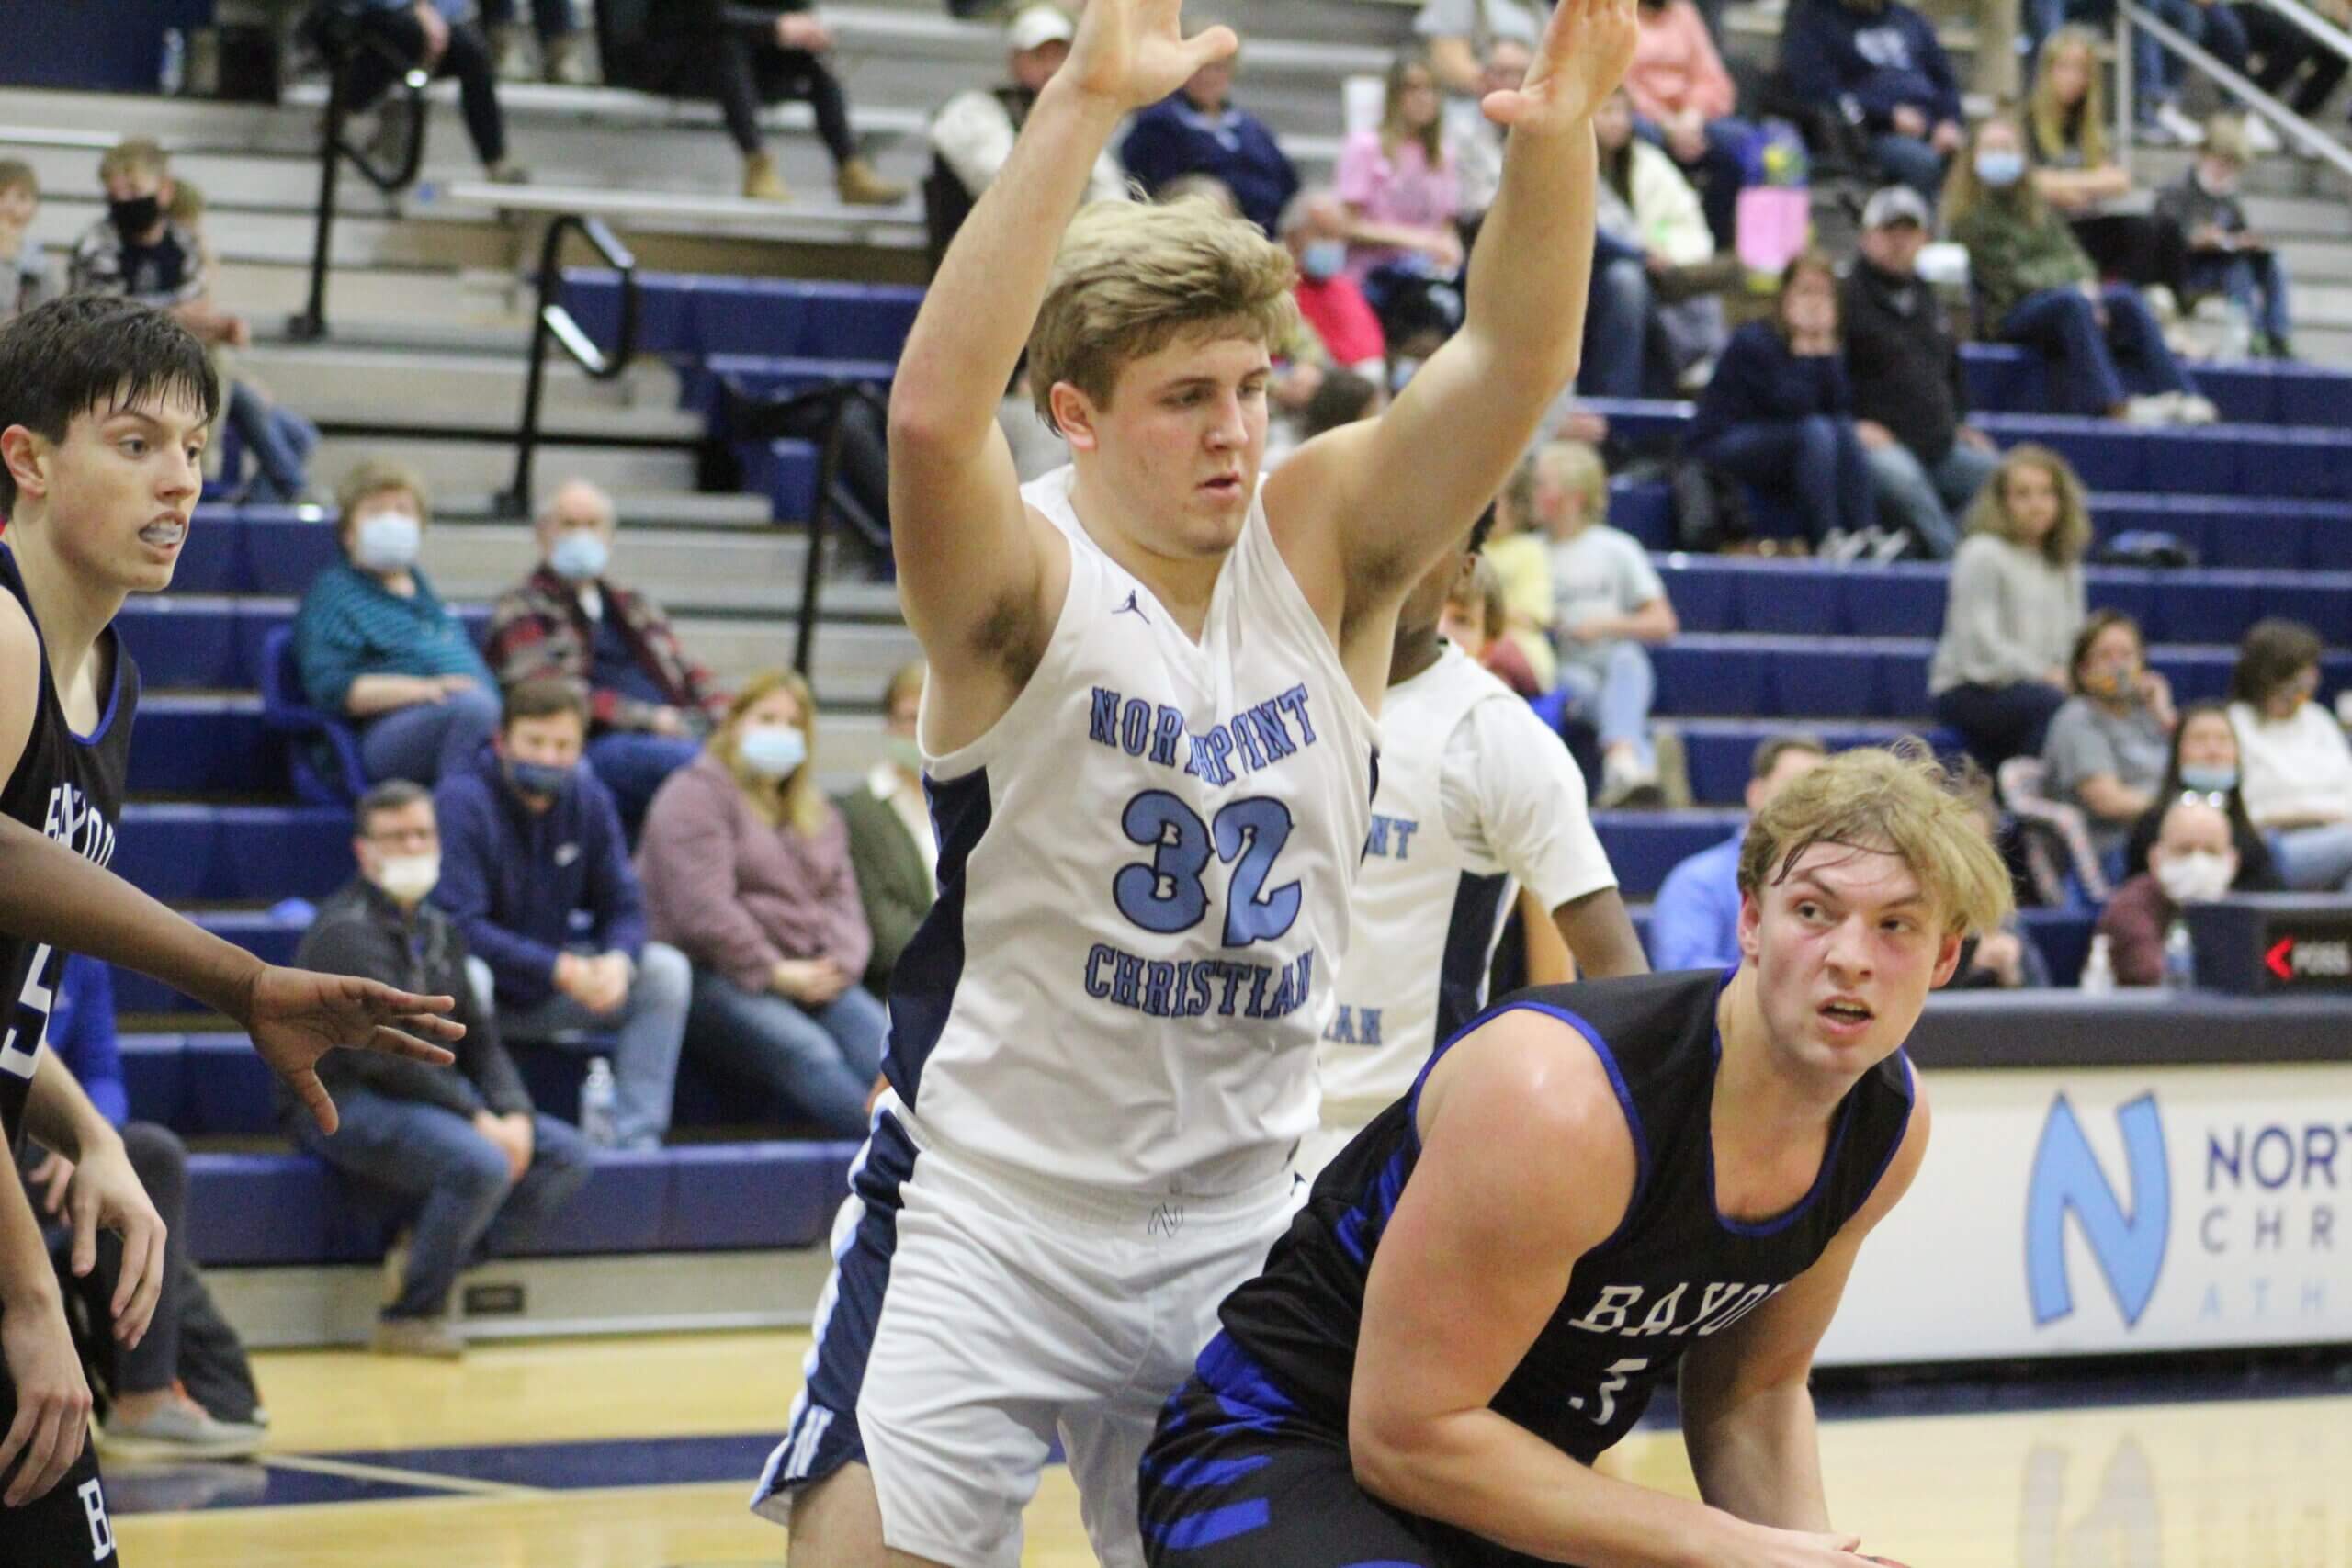 Friday roundup: Northpoint stomps Colts in sweep